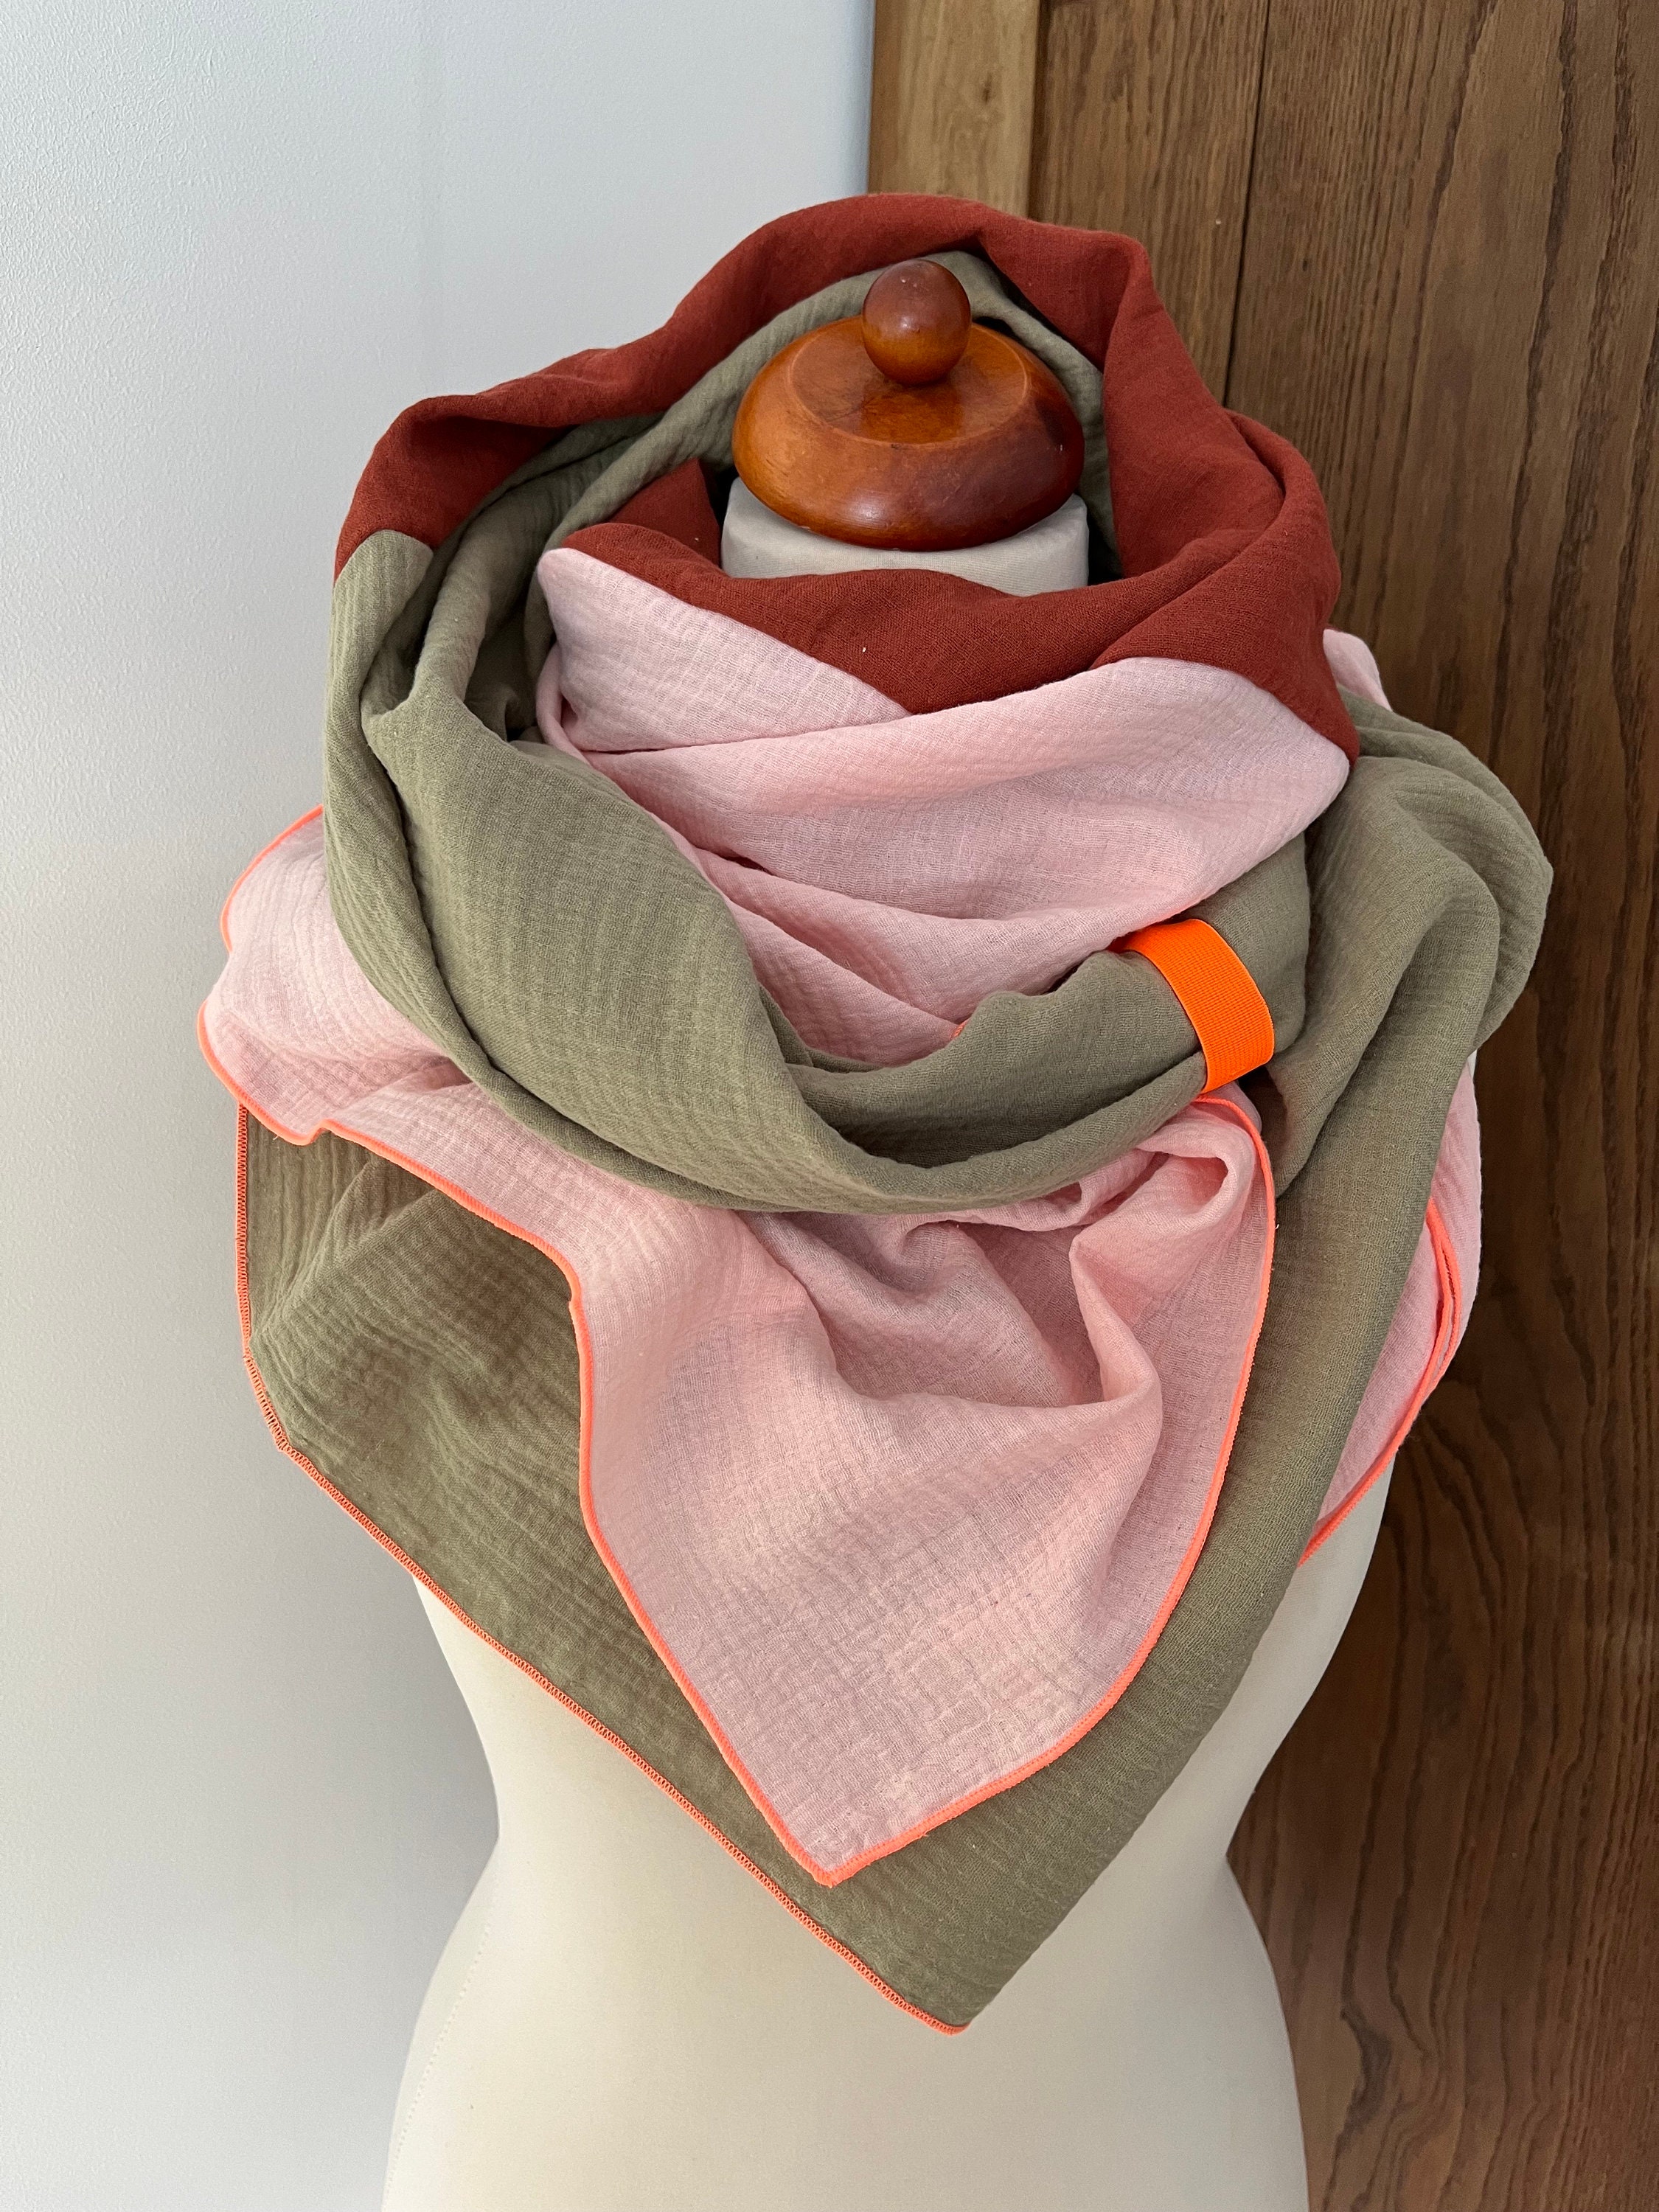 Assorted Wool Louis Vuitton-Inspired Scarf with Fox Pom-Pom